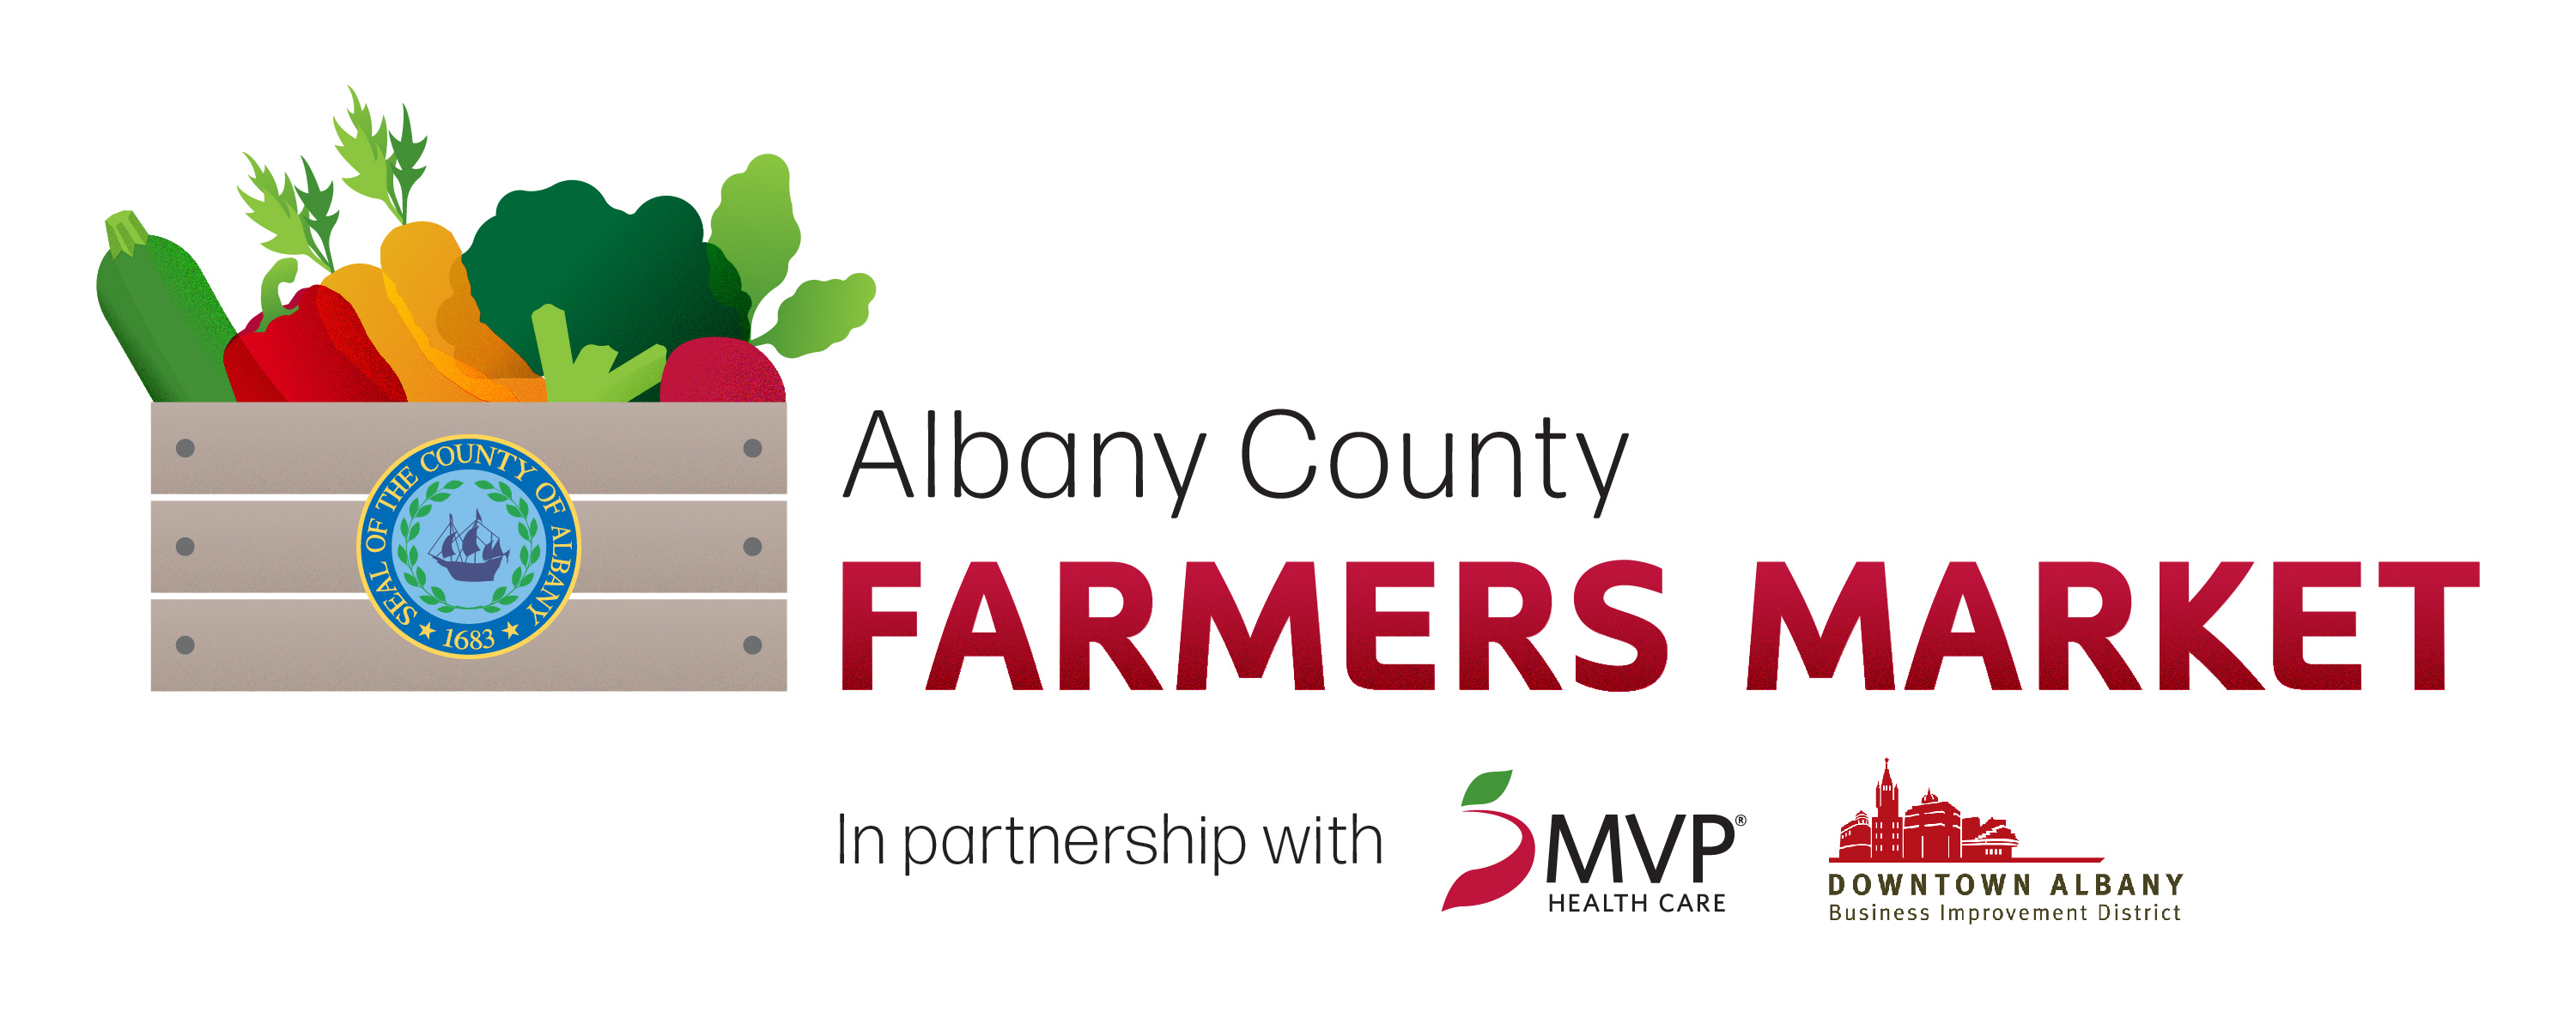 Albany County Farmers Market, in partnership with MVP Health Care and Downtown Albany BID